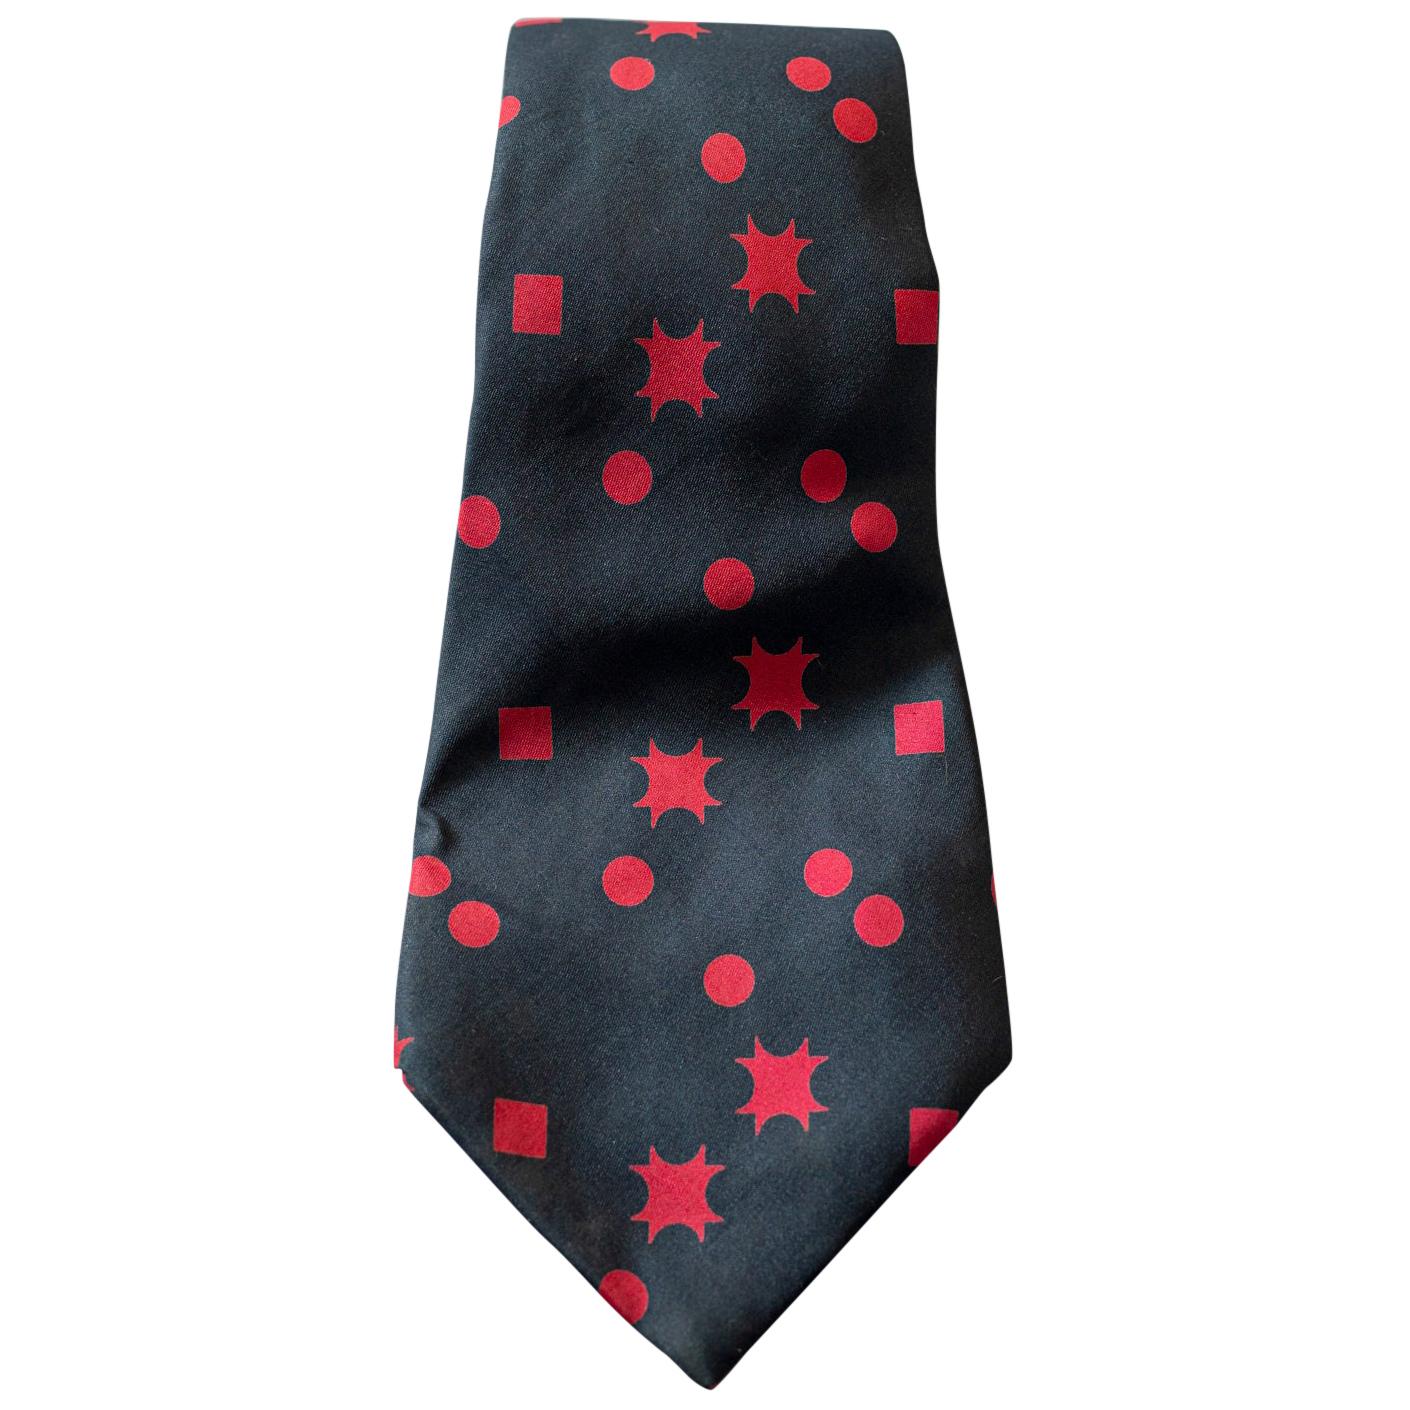 Vintage Piere D'Albye all-silk tie with small red geometric shapes For Sale